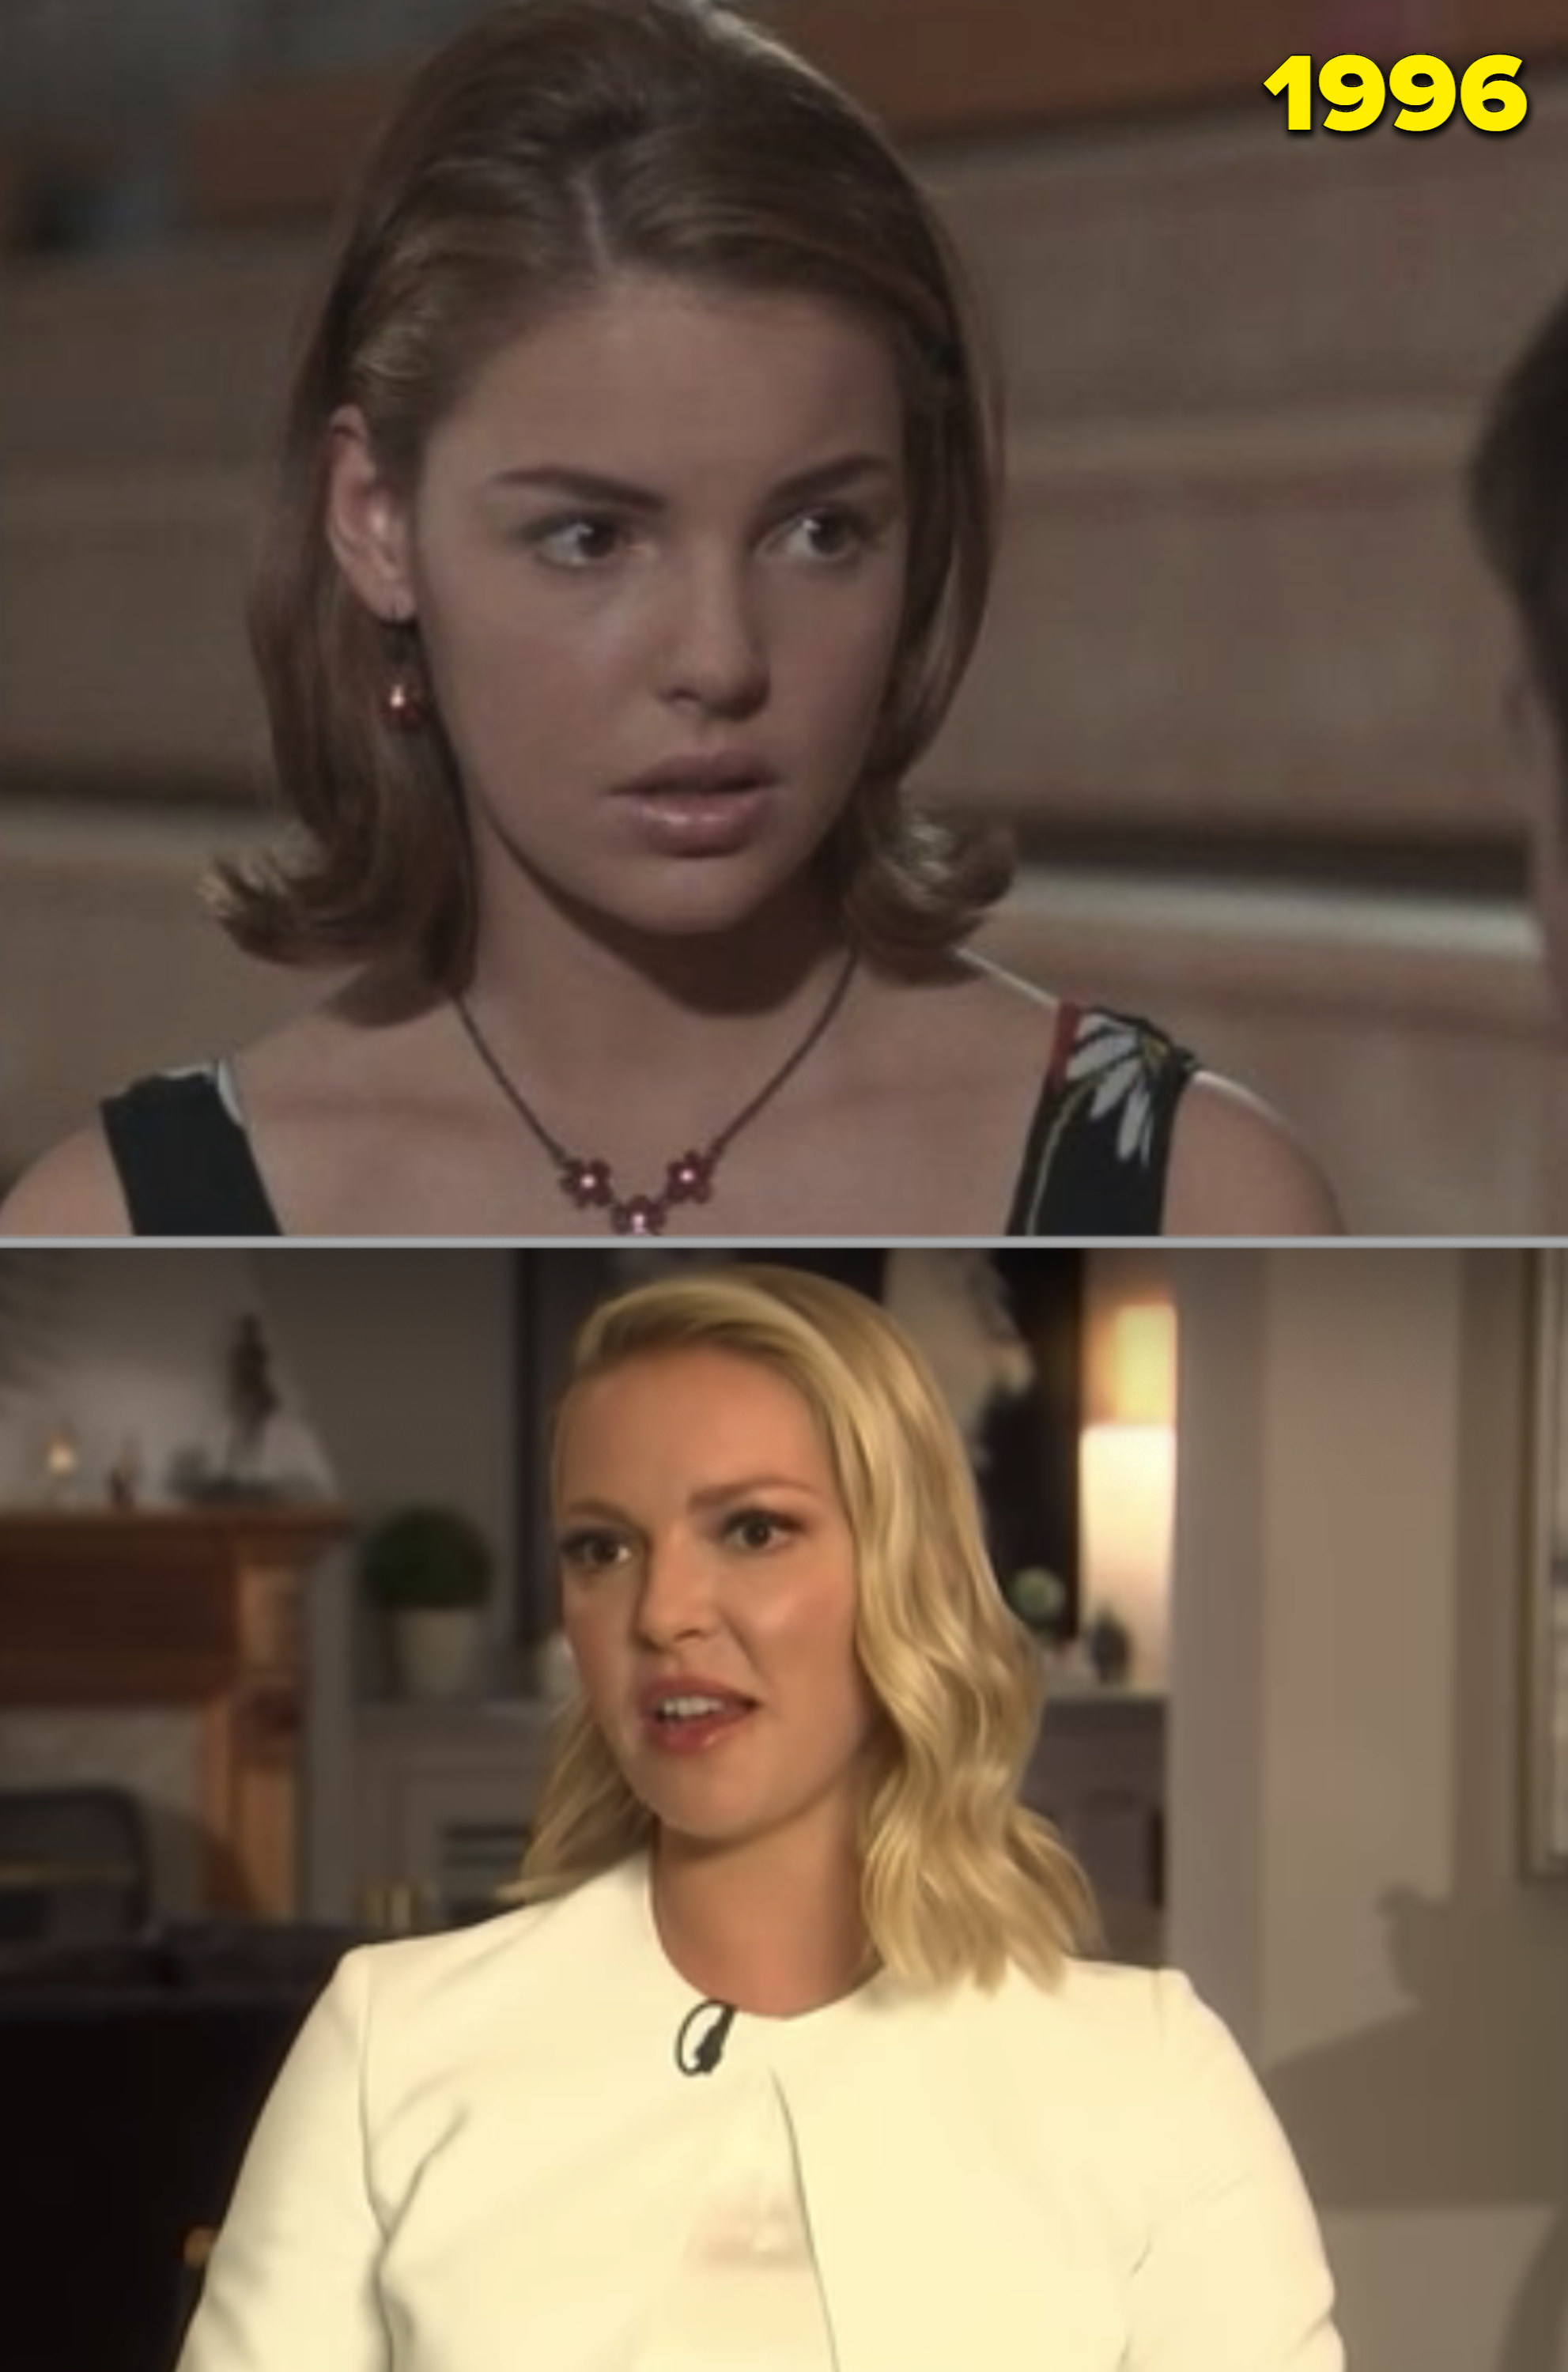 Katherine Heigl as a teen vs. her as an adult being interviewed